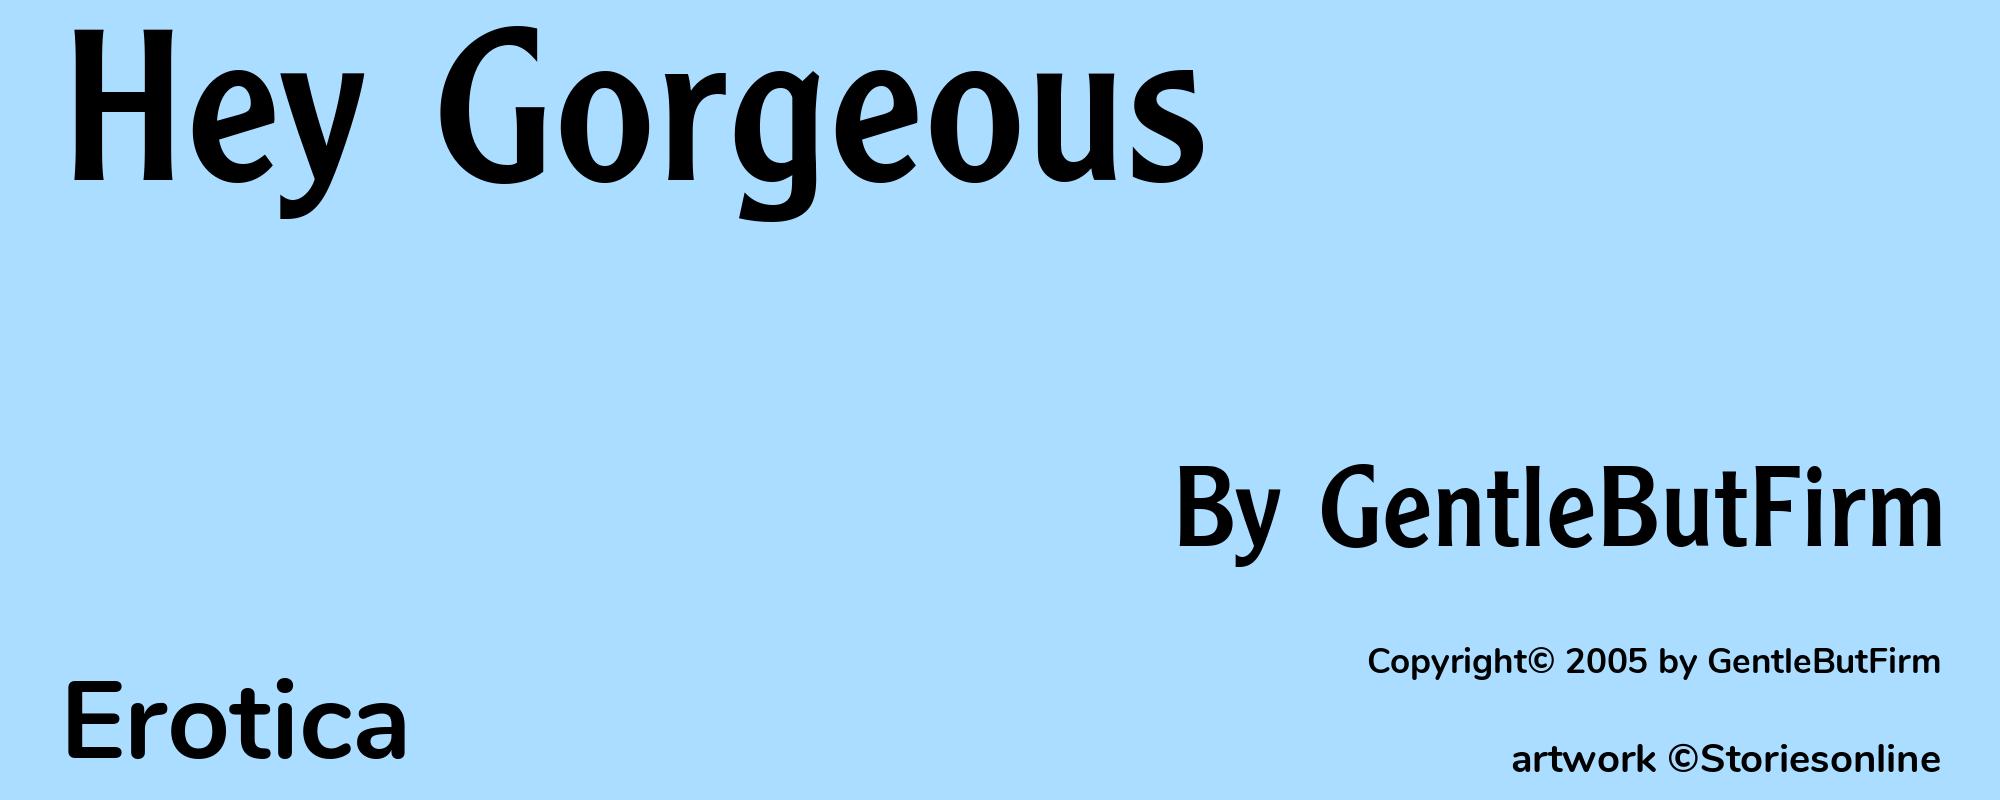 Hey Gorgeous - Cover